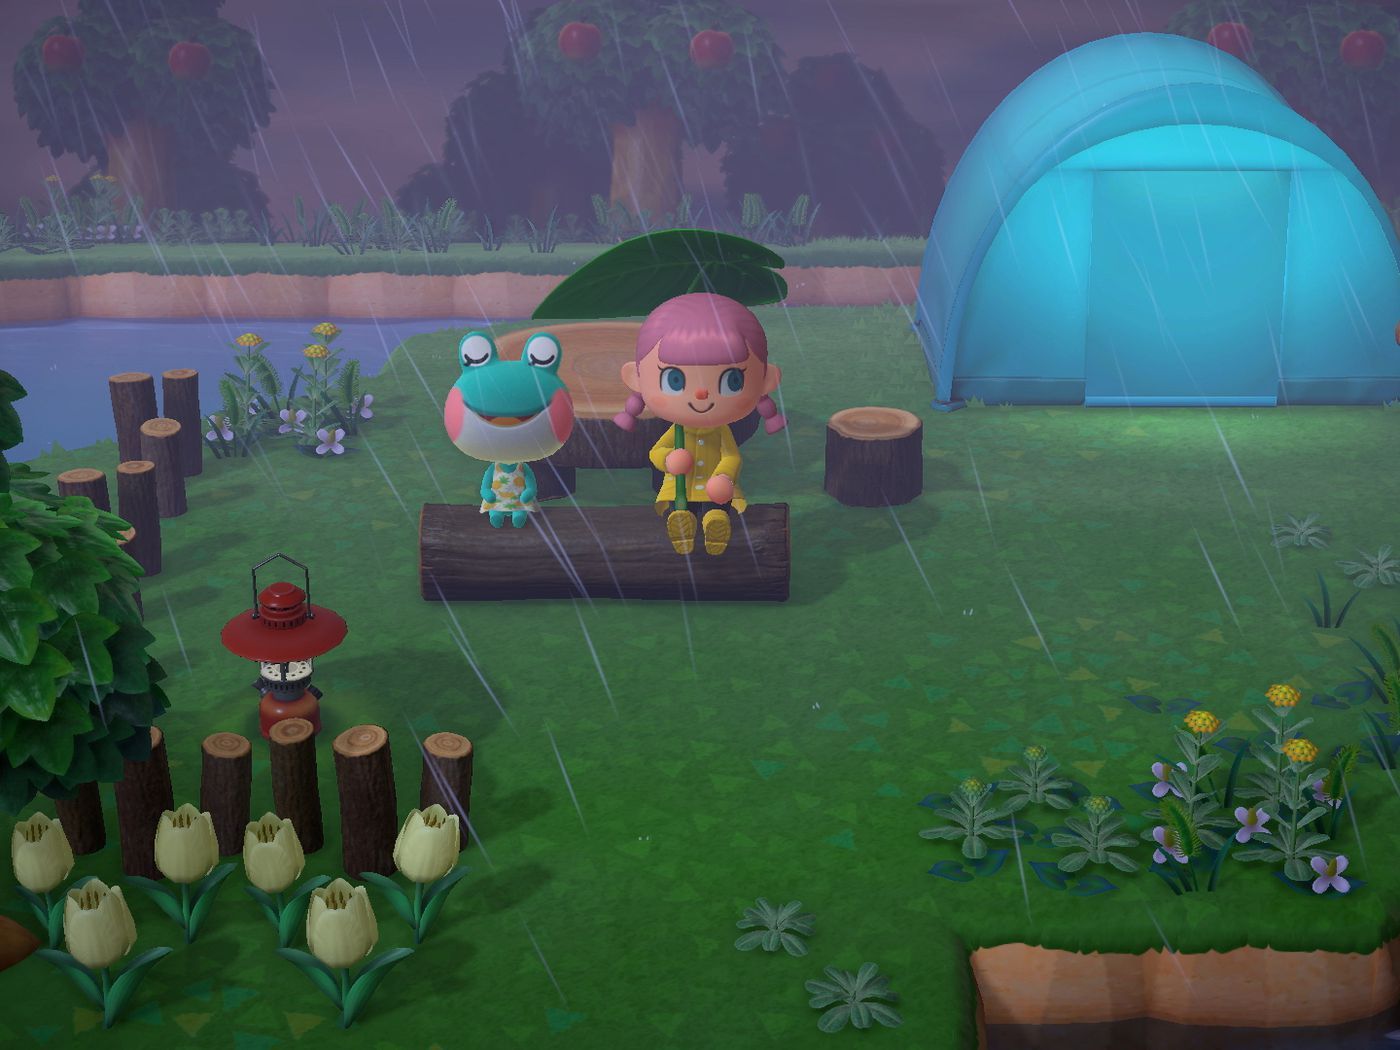 Animal Crossing frog villagers react hilariously when given frogs